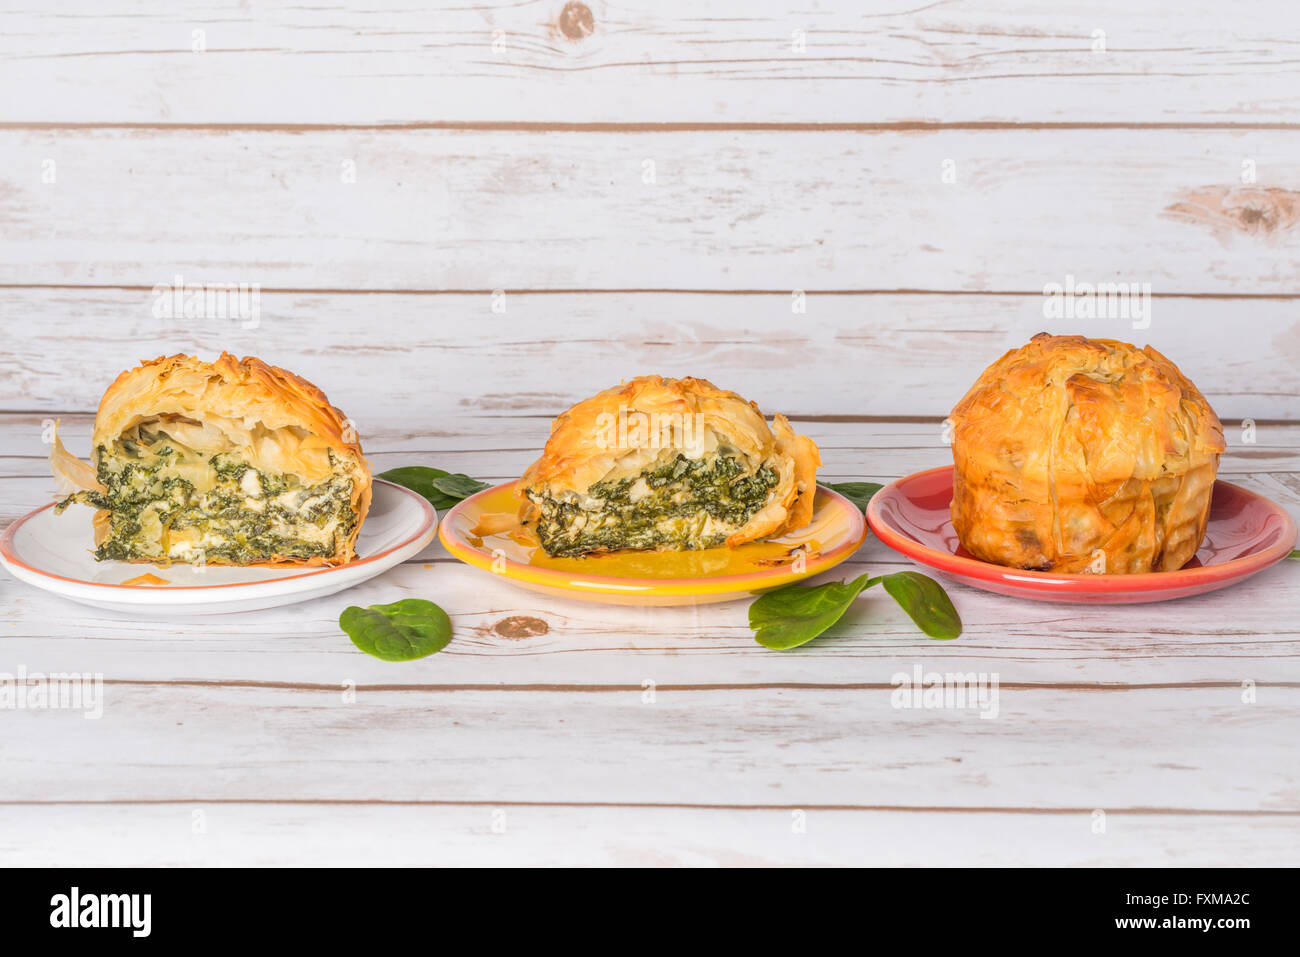 Homemade Spanakopita - Greek spinach pie with feta and ricotta, sliced on plates Stock Photo